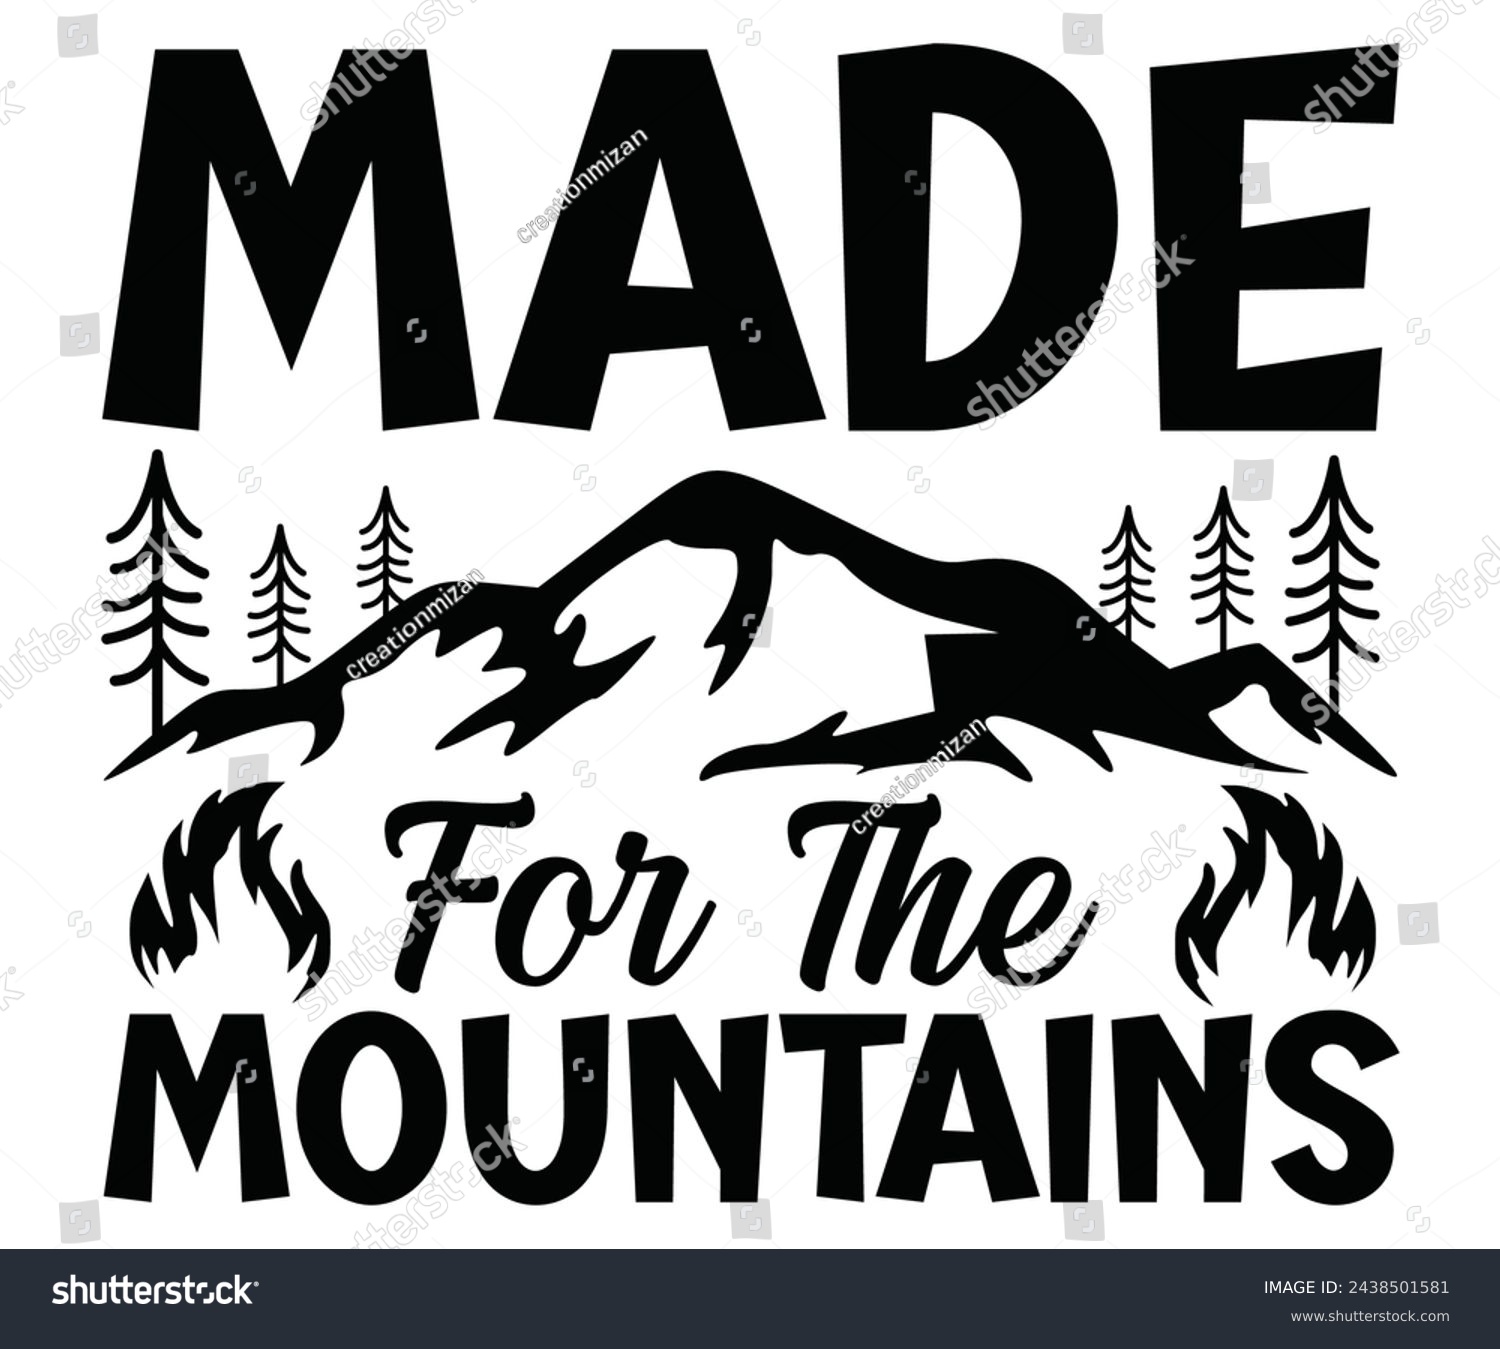 SVG of Made For The  Mountains Svg,Camping Svg,Hiking,Funny Camping,Adventure,Summer Camp,Happy Camper,Camp Life,Camp Saying,Camping Shirt svg